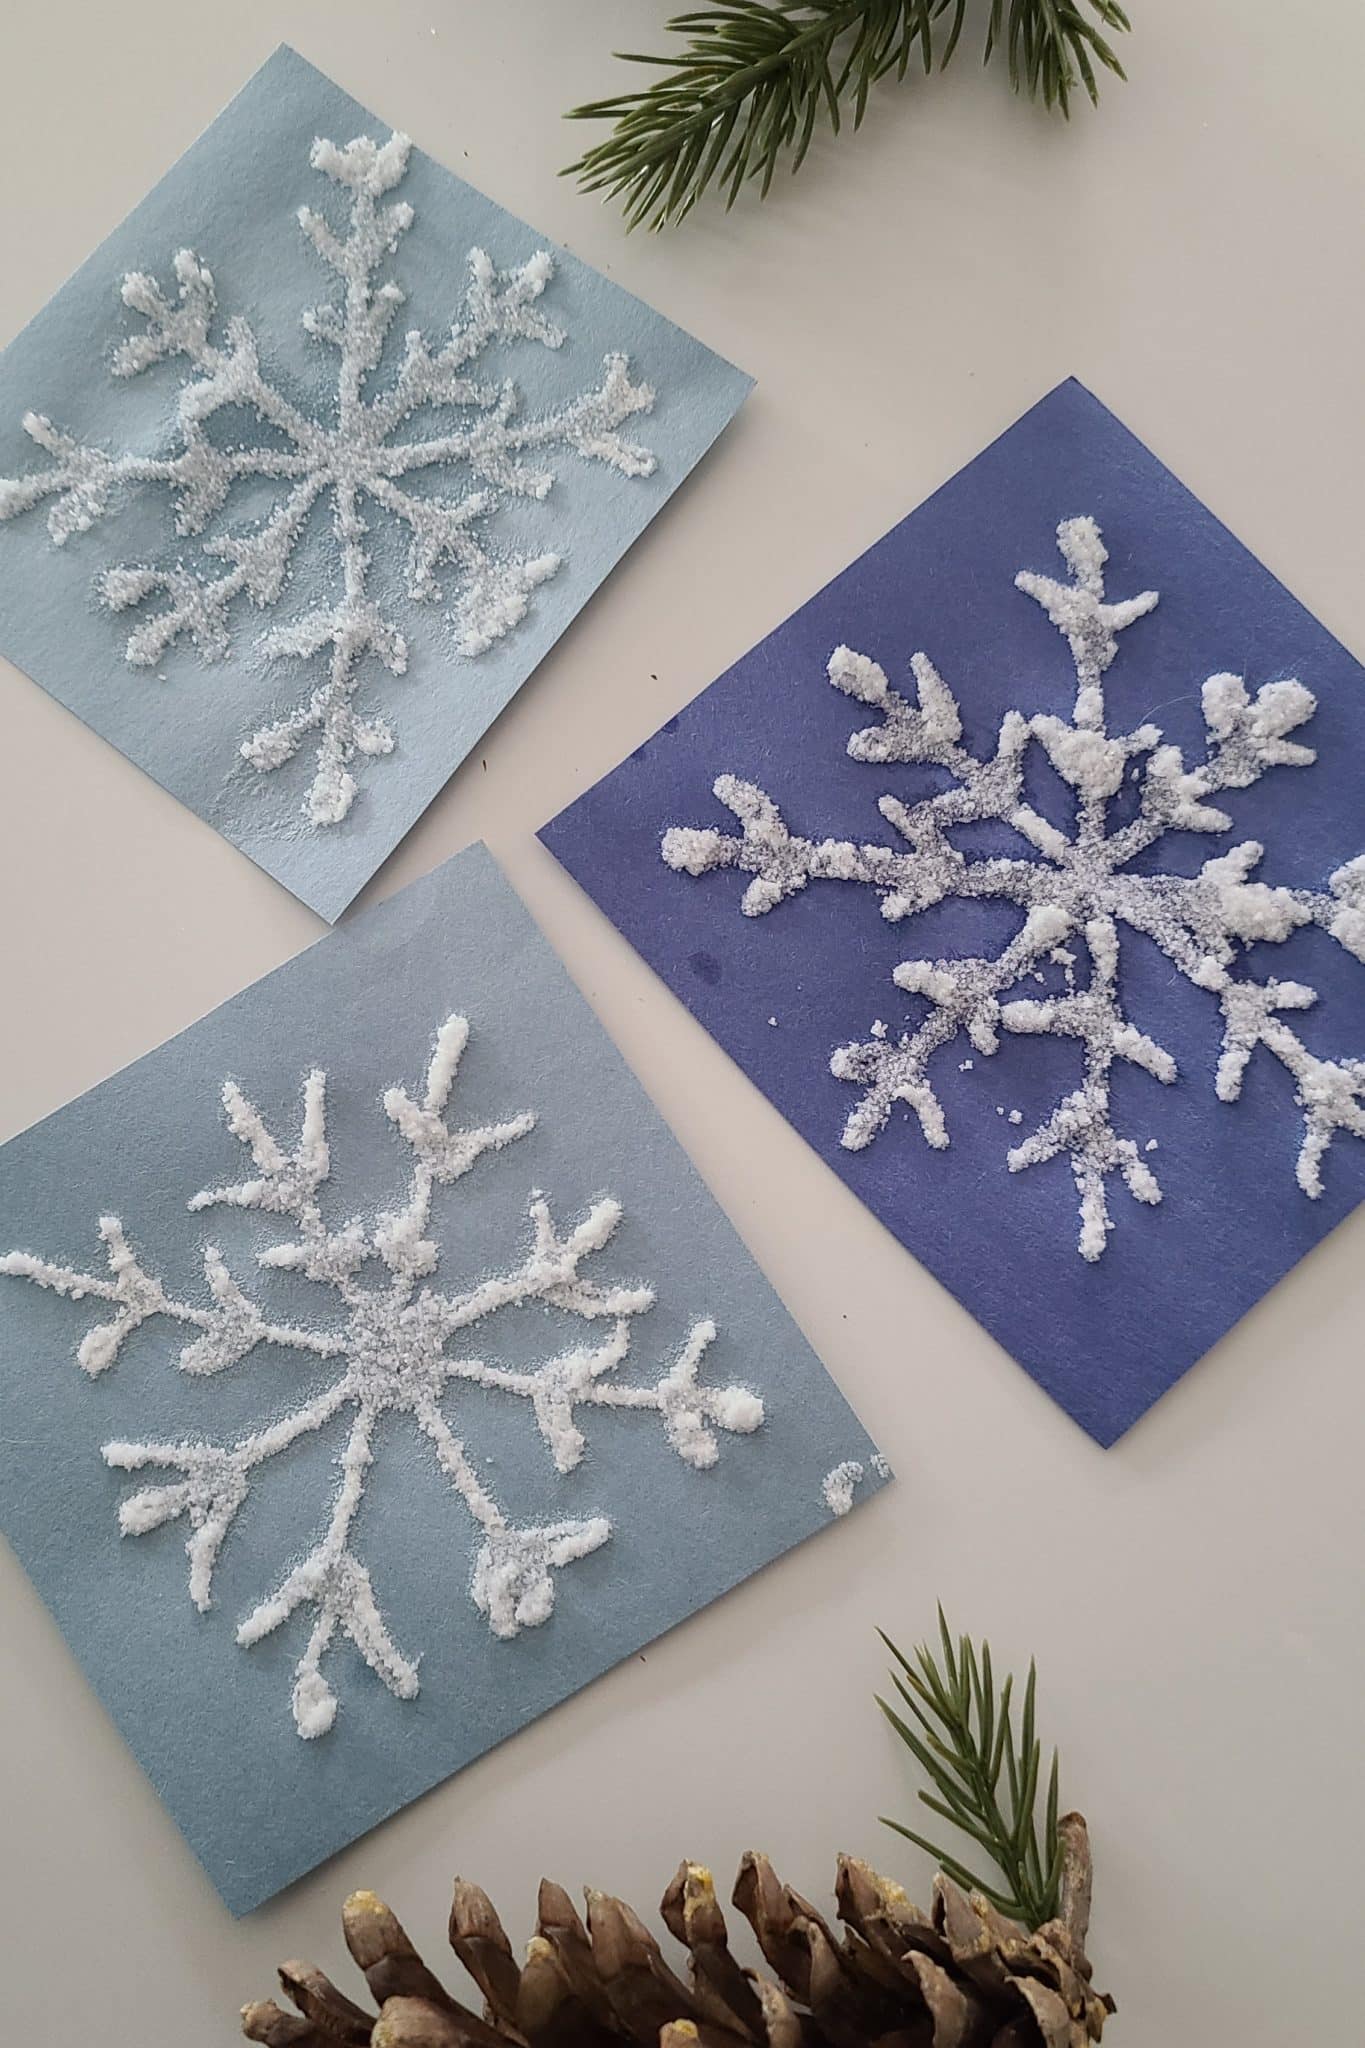 easy crafts for kids' christmas - salt snowflakes